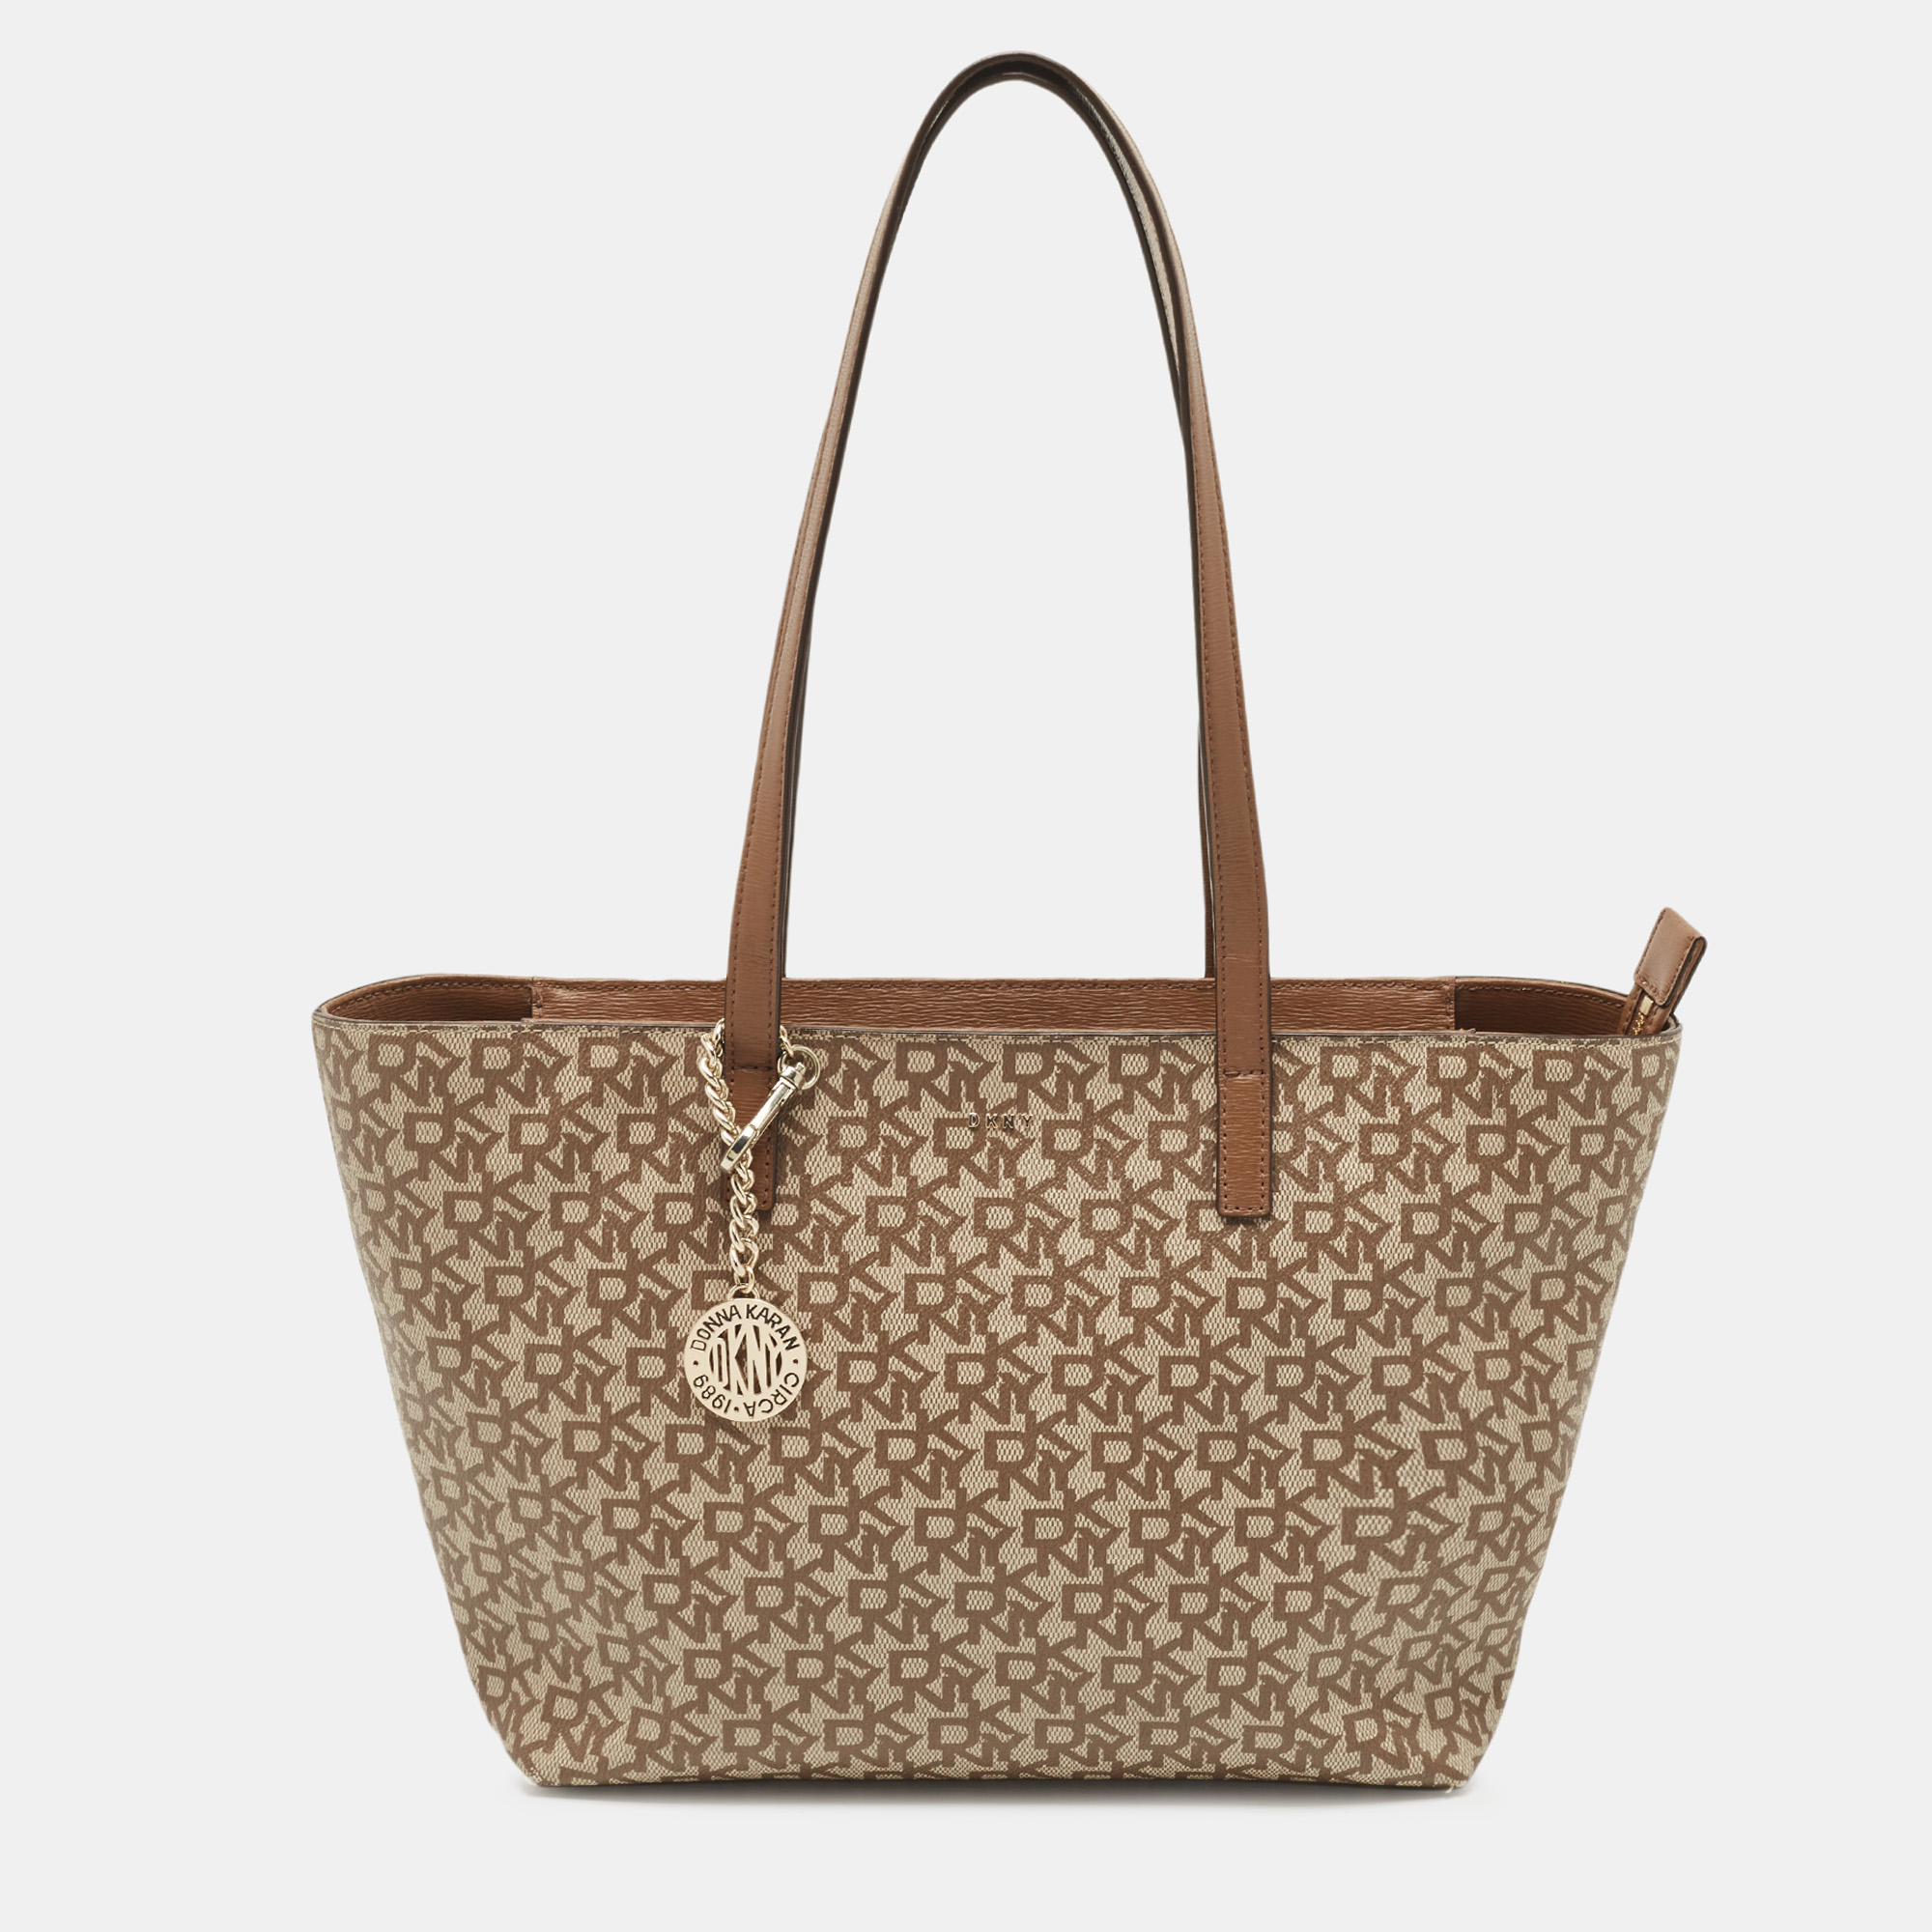 Elevate your everyday elegance with this DKNY womens tote. Meticulously crafted it seamlessly blends luxury and functionality to be a reliable accessory.